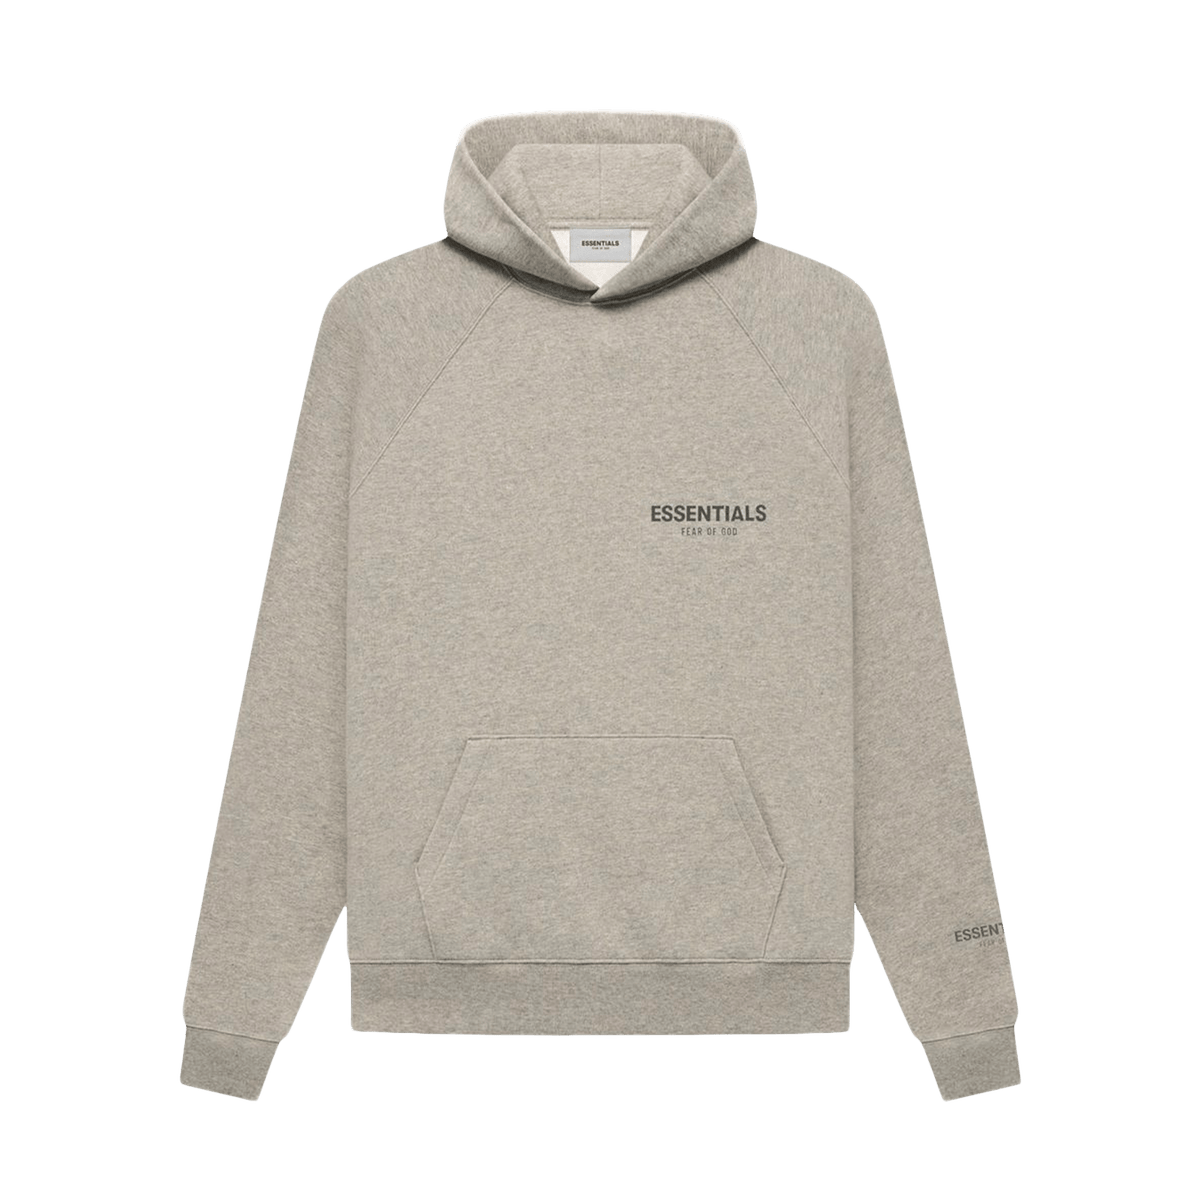 Fear of God Essentials Core Collection Pullover Hoodie 'Dark Heather Oatmeal' - Kick Game